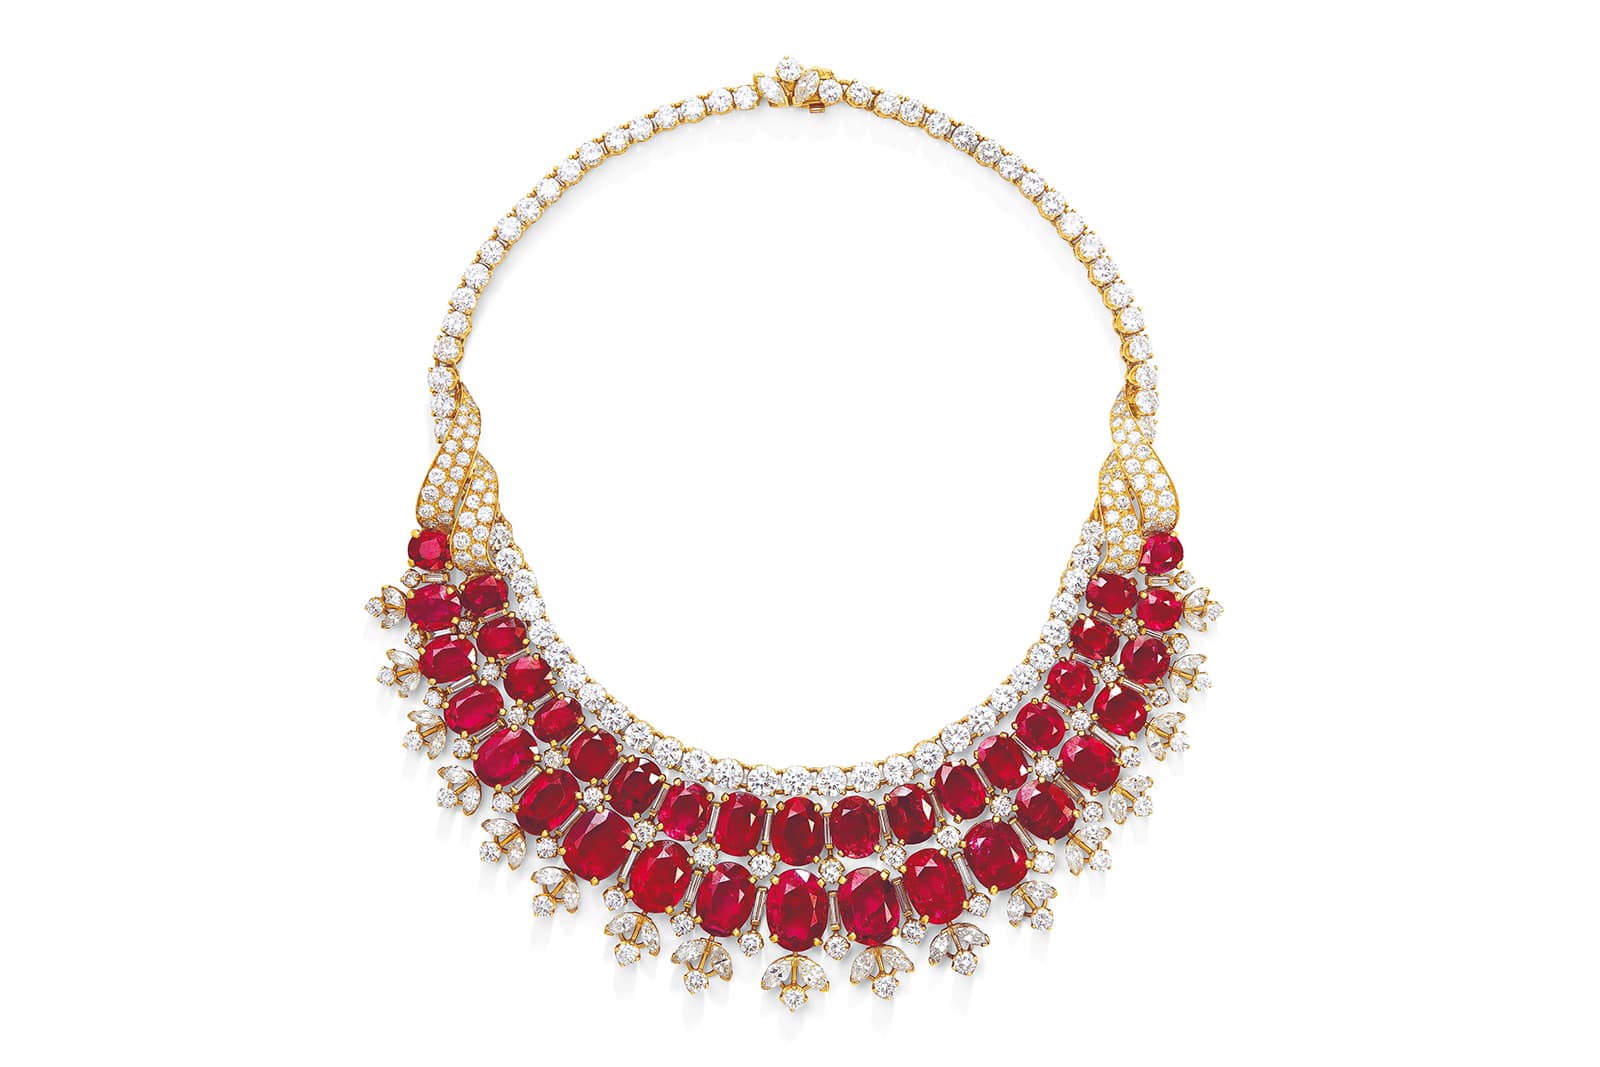 Jewellery of royal provenance at Christie's auction